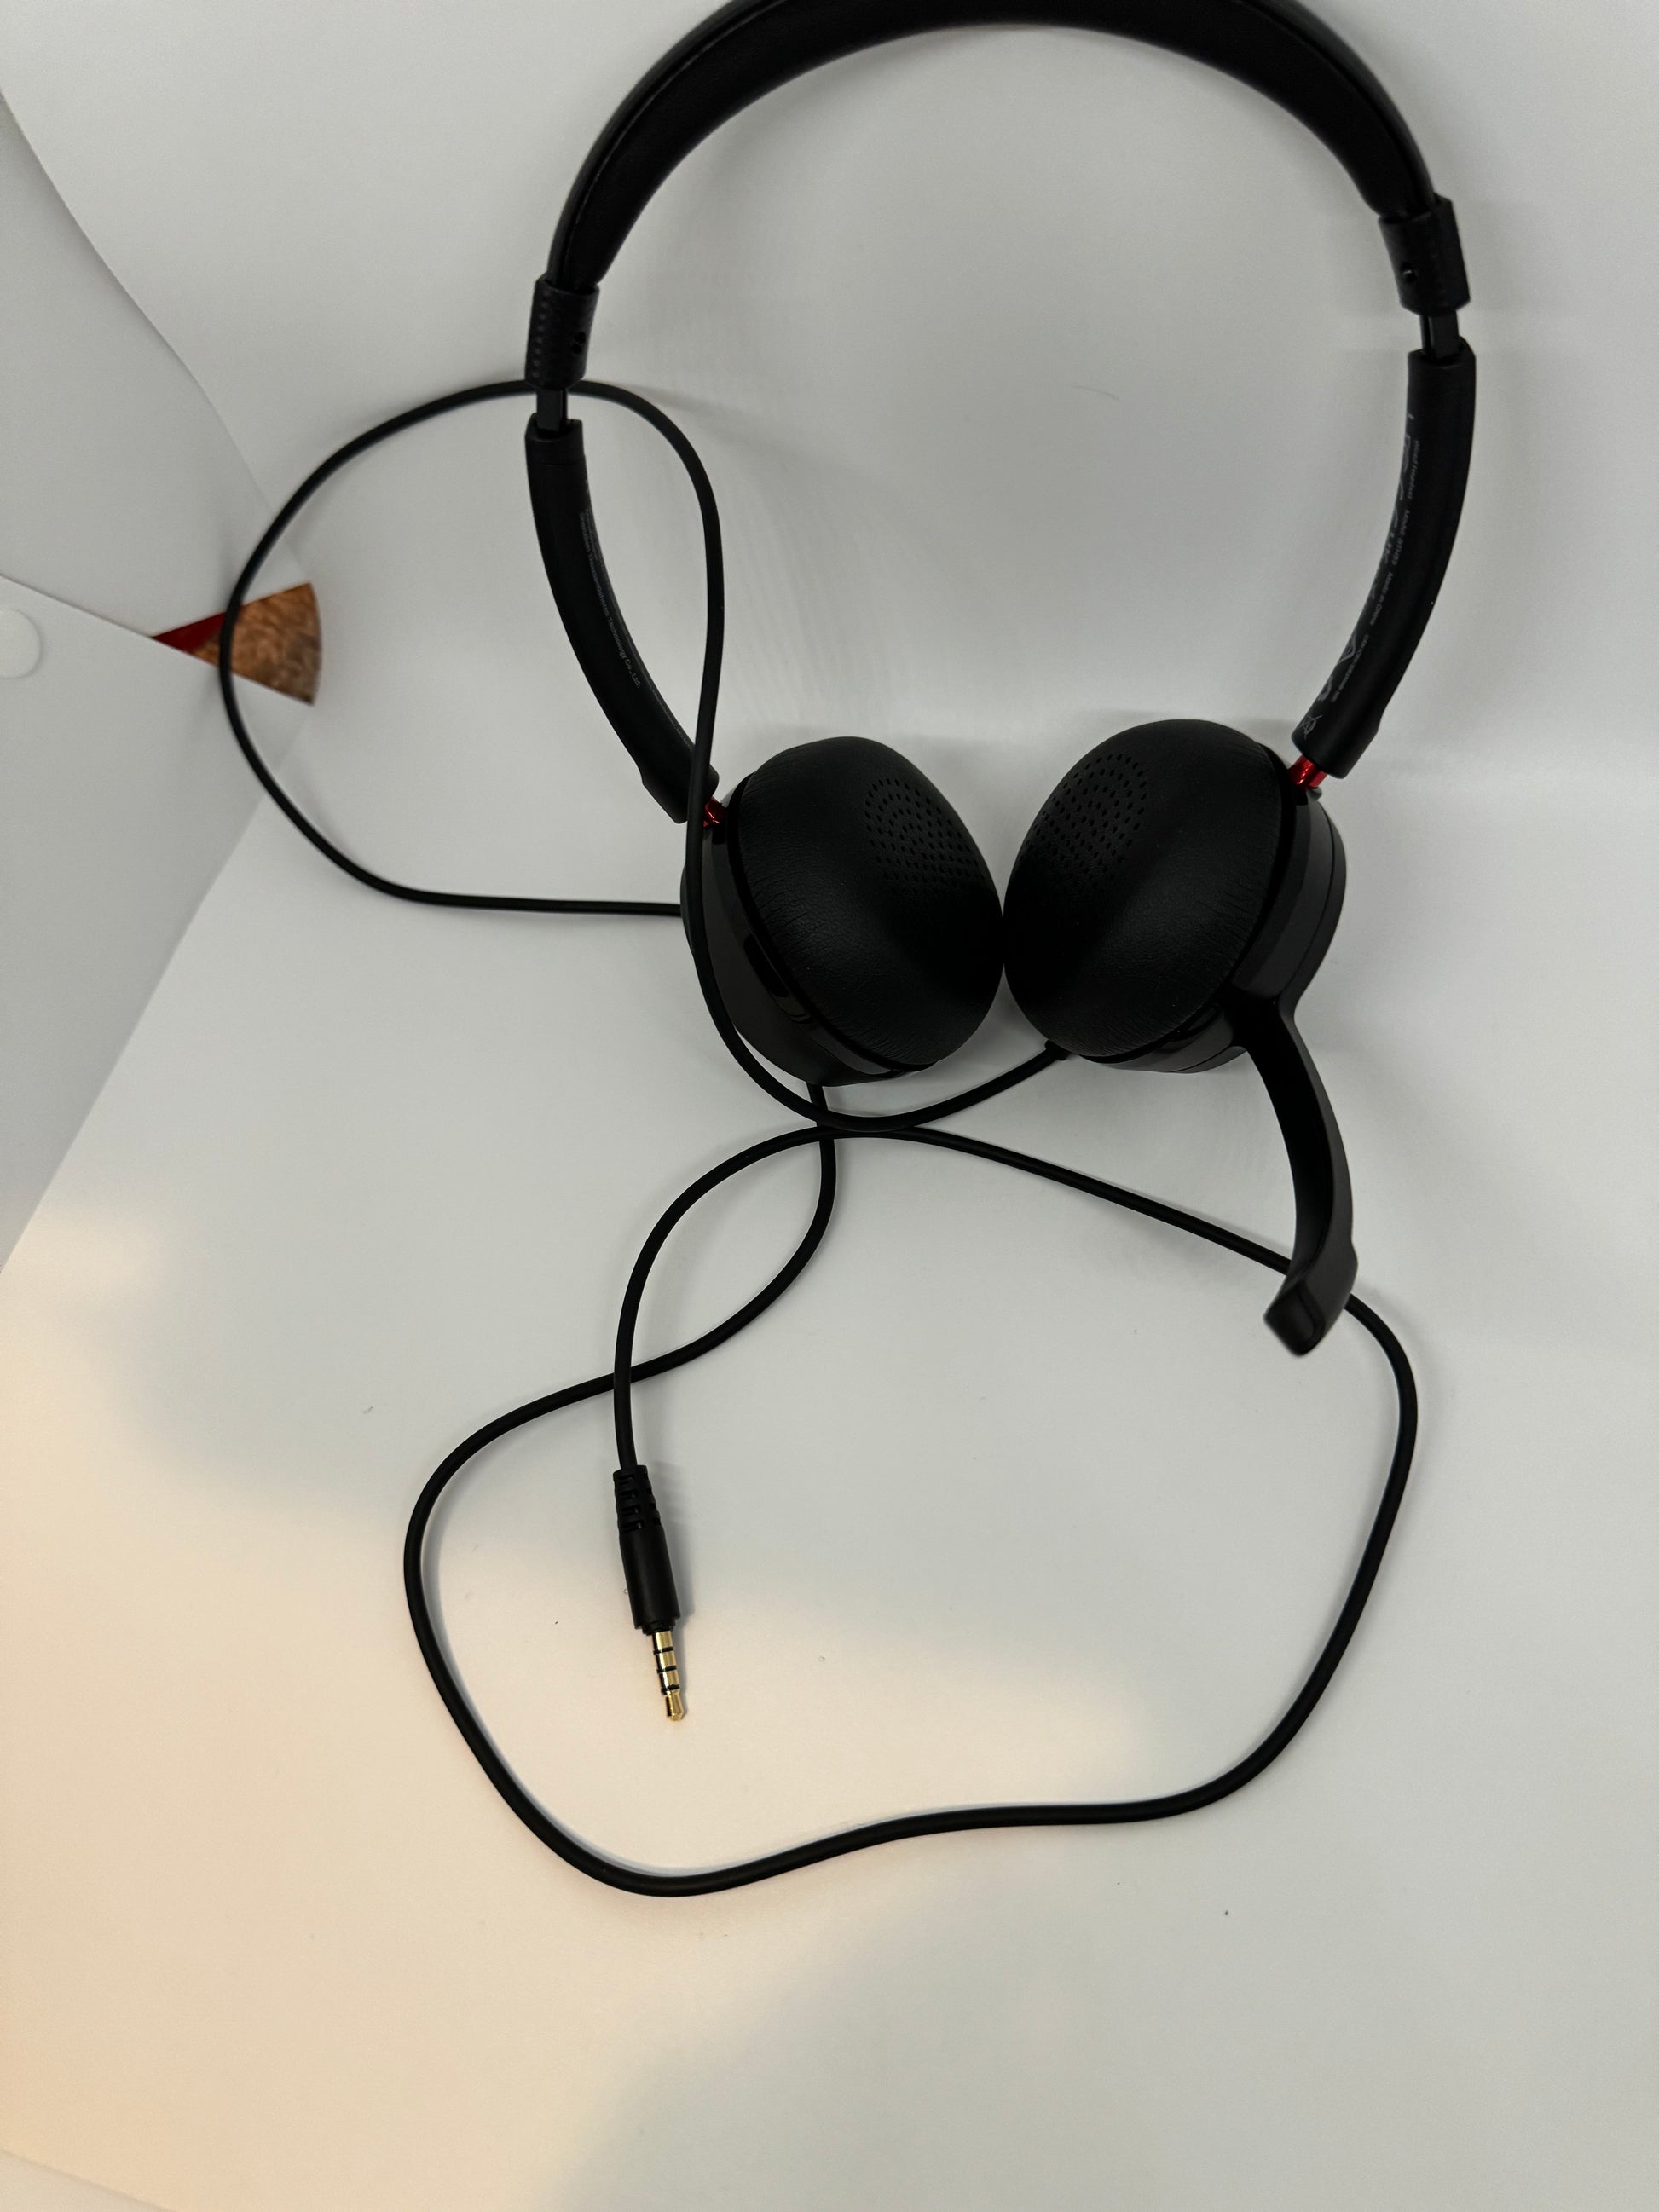 The picture shows a pair of black headphones. The headphones have a black headband and two black ear cups with perforated patterns. The ear cups are connected to the headband with a red accent. There is a black cable attached to the headphones, which has a 3.5mm audio jack at the end. The background is white, and there is a small part of something that looks like a cork material with a red tip in the top left corner, but it's mostly out of frame.